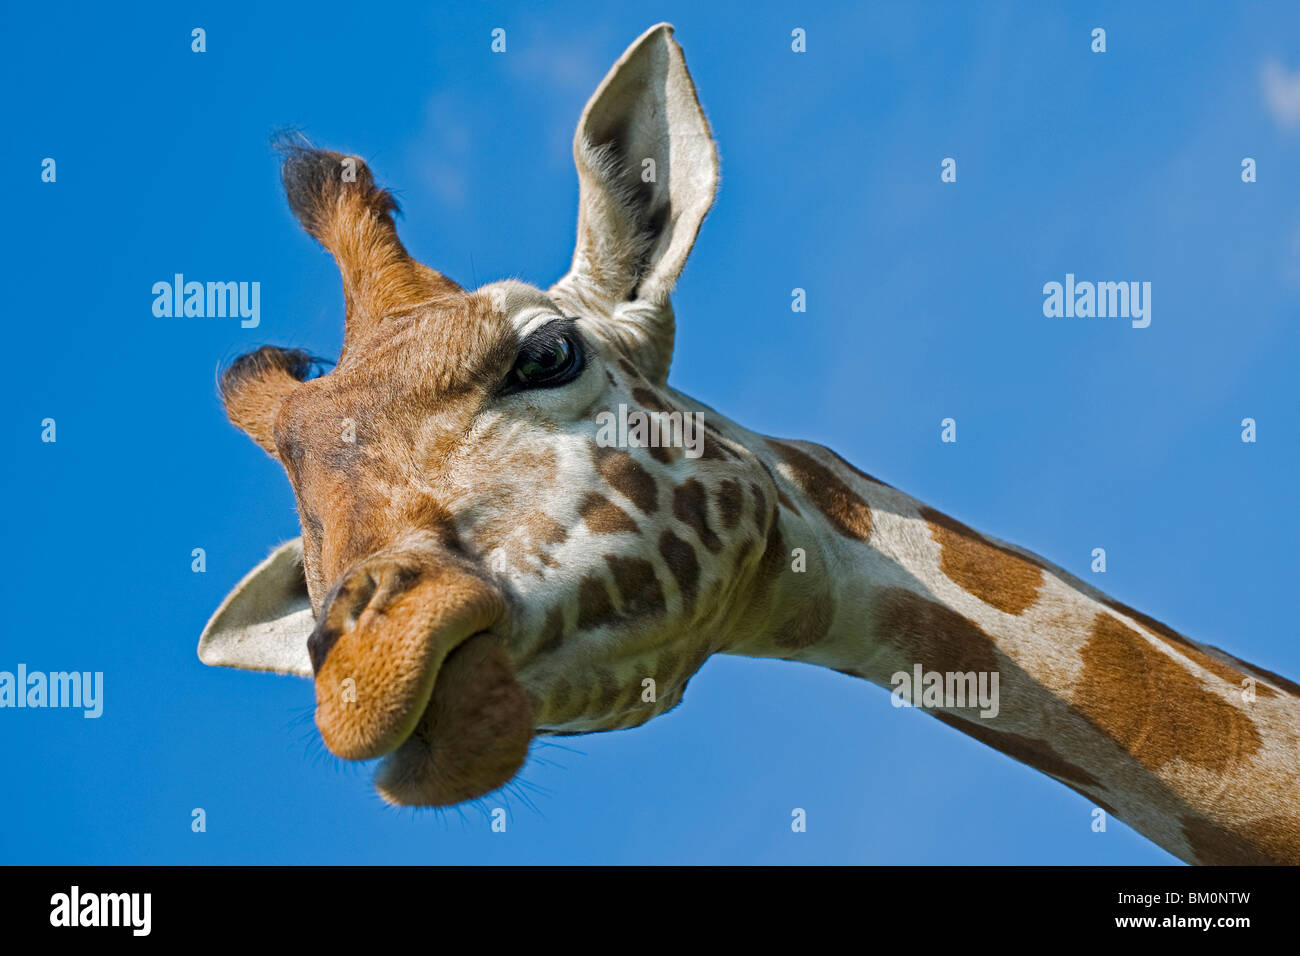 The head of a Rothschild Giraffe from underneath as it stare down towards the camera Stock Photo